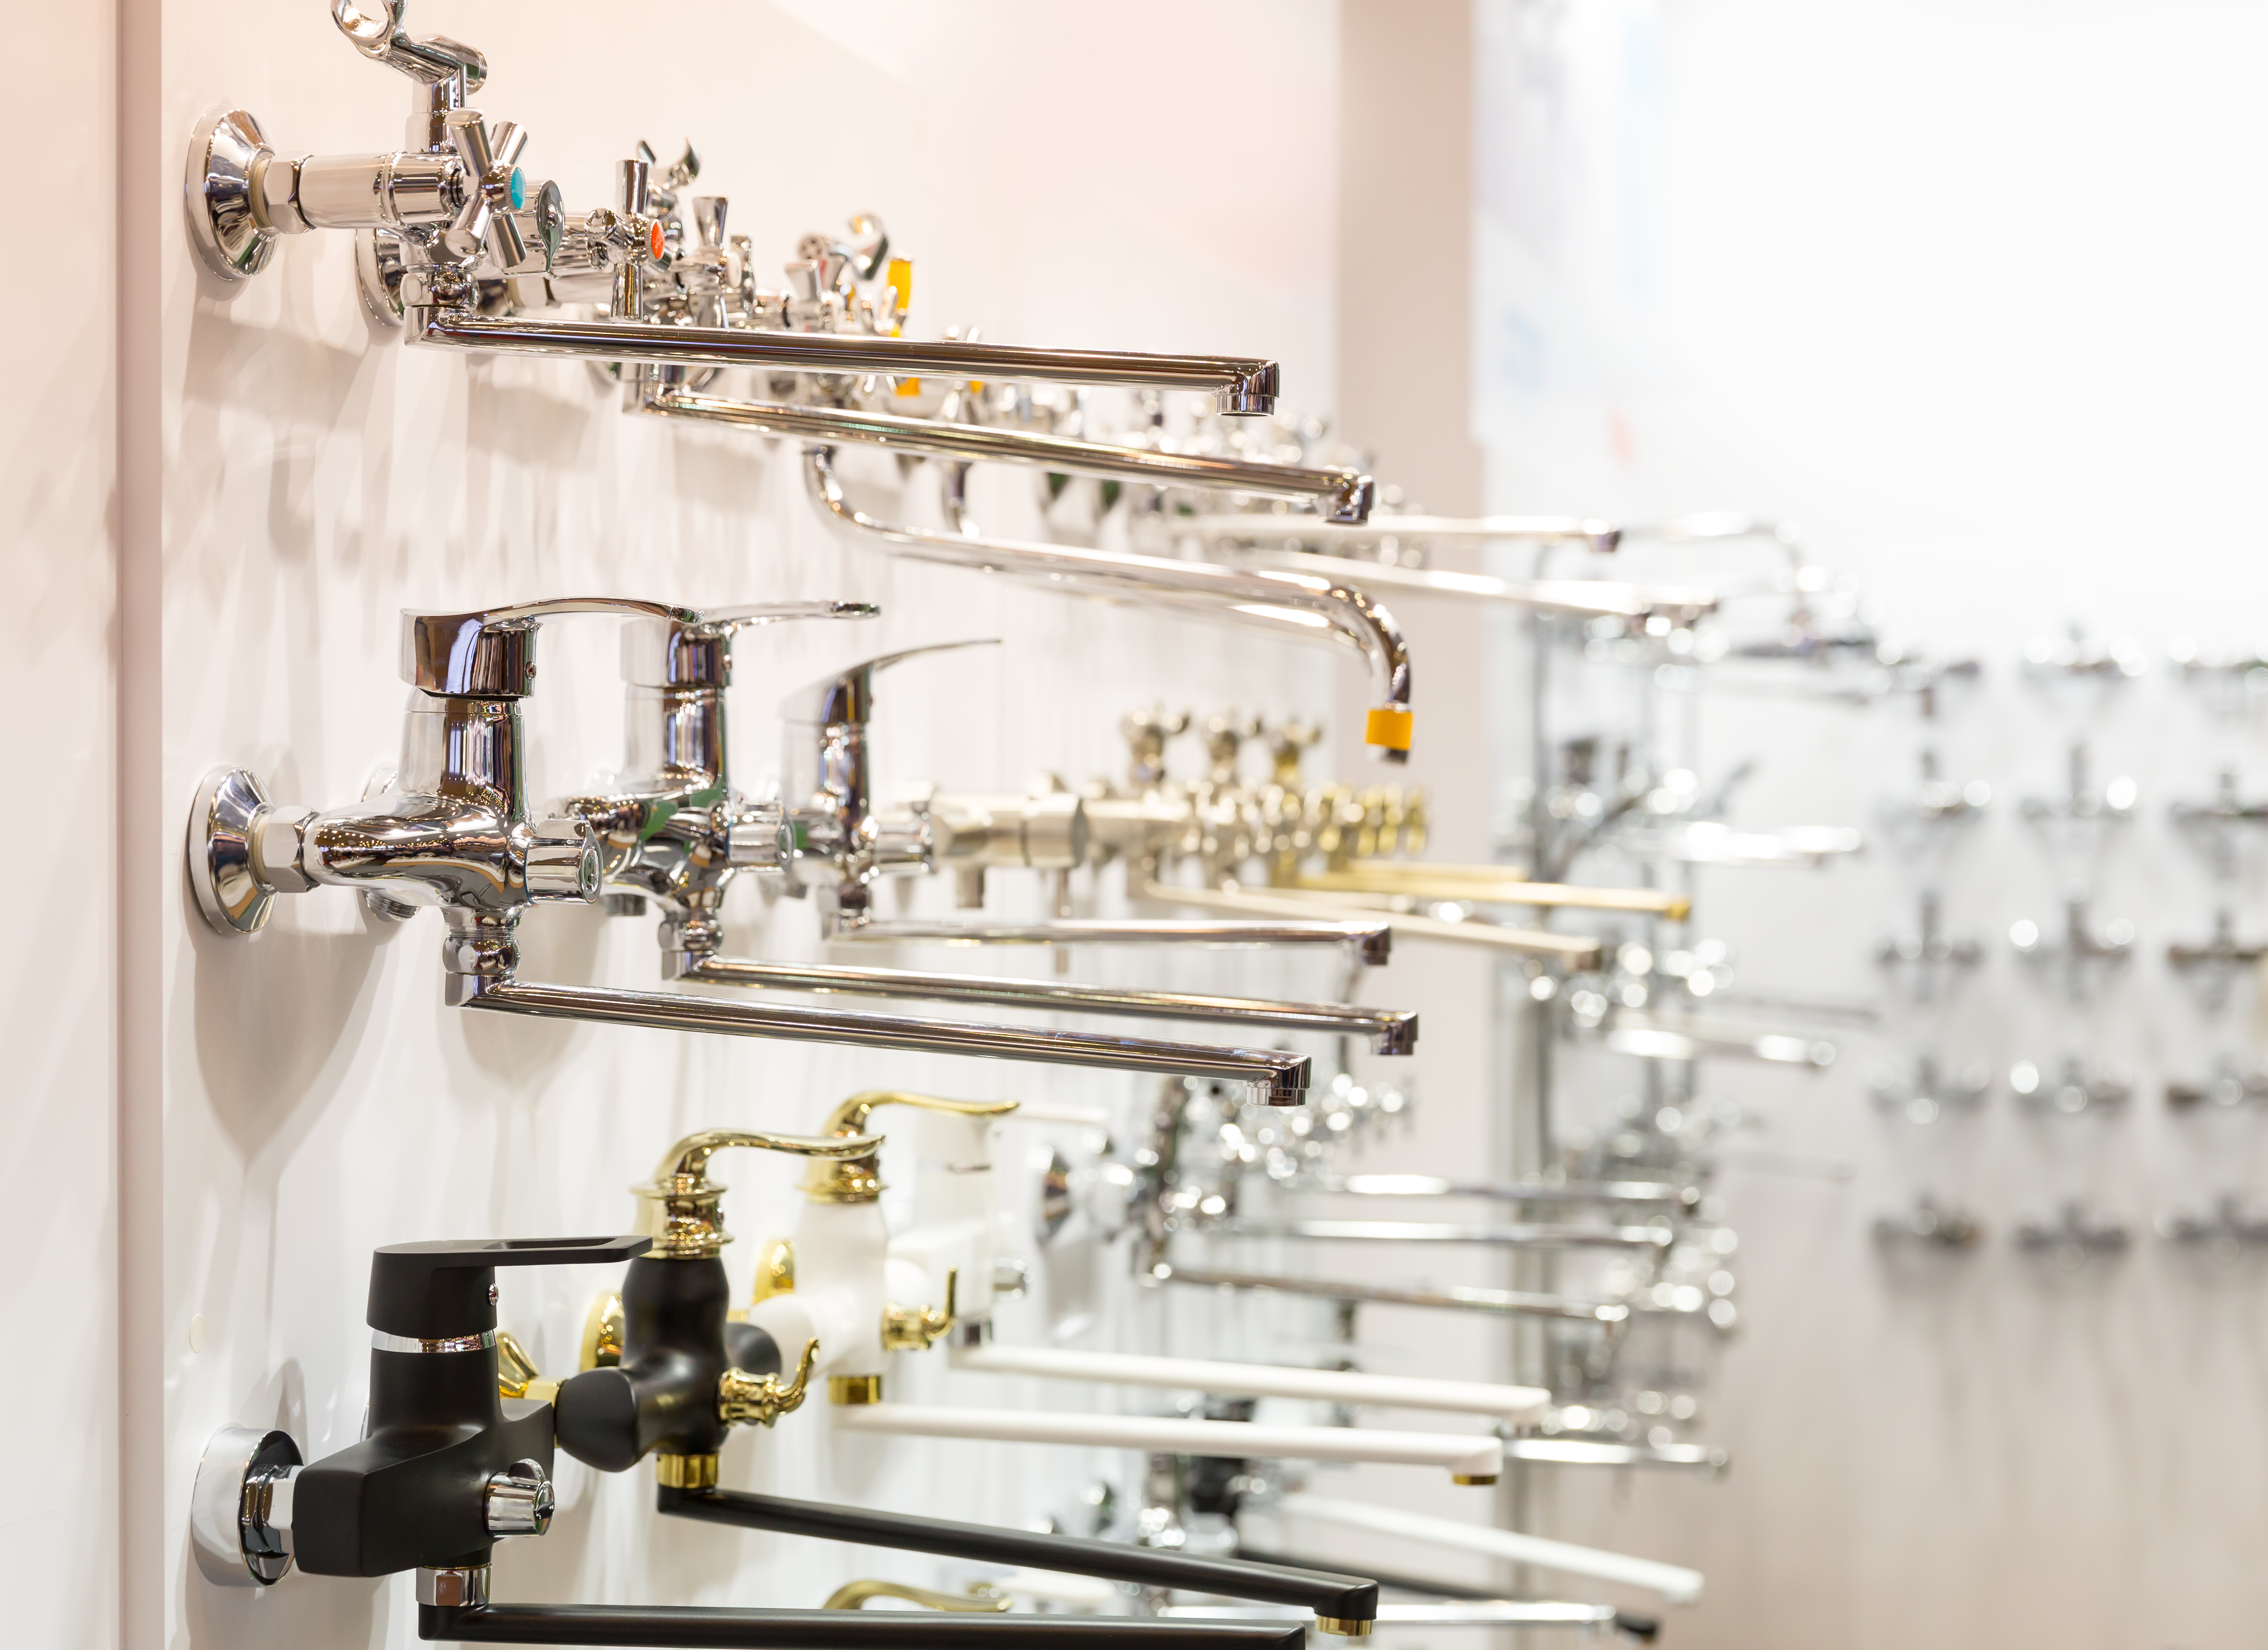 Rows of new faucets for bathroom in plumbing shop